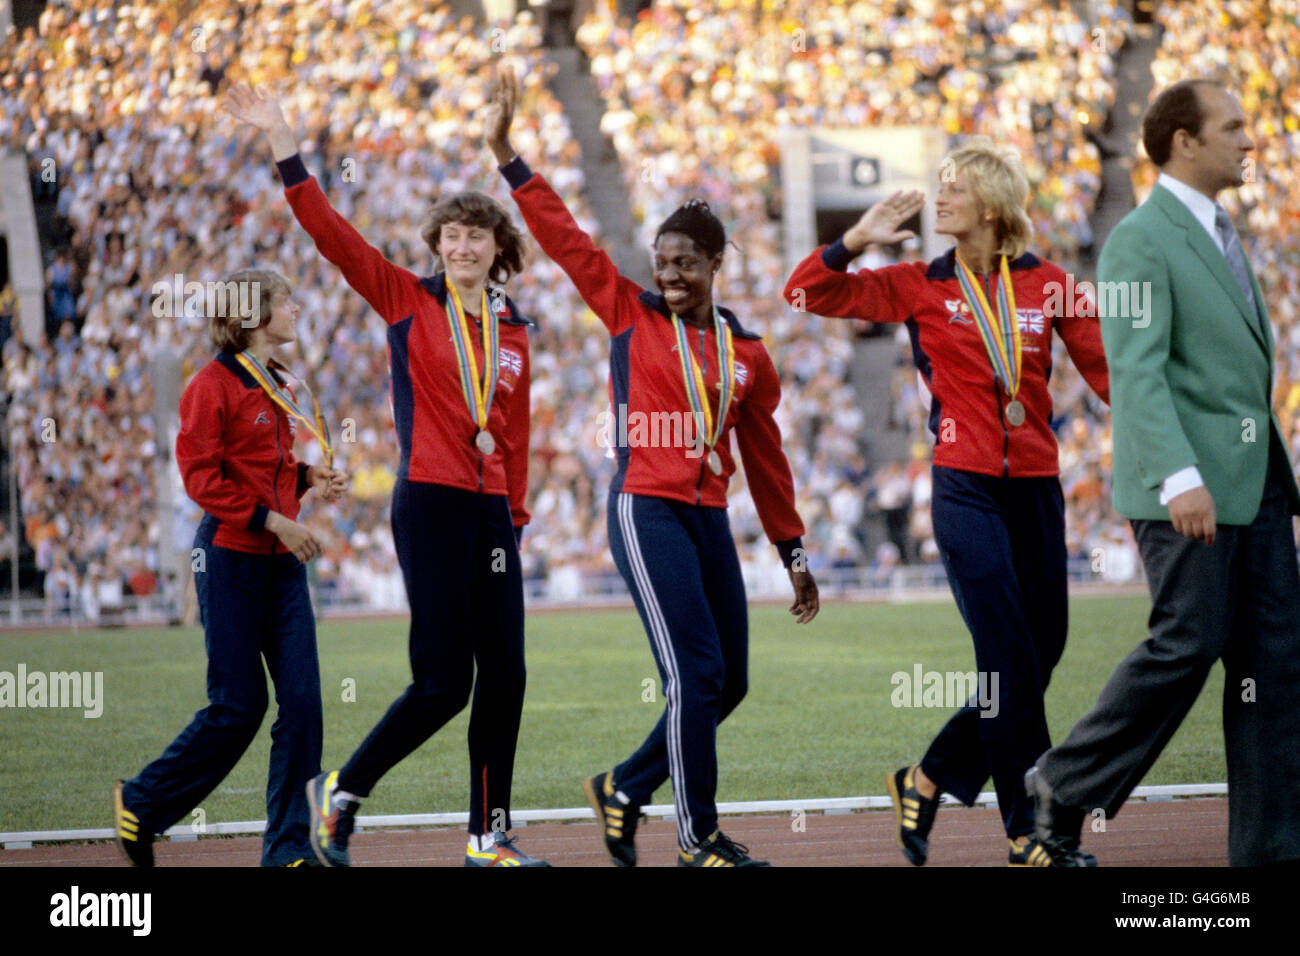 British bronze medal winners in the 4x400 metres relay, Kathy Smallwood, Michelle Probert, Joslyn Hoyte-Smith and Donna Hartley. Stock Photo